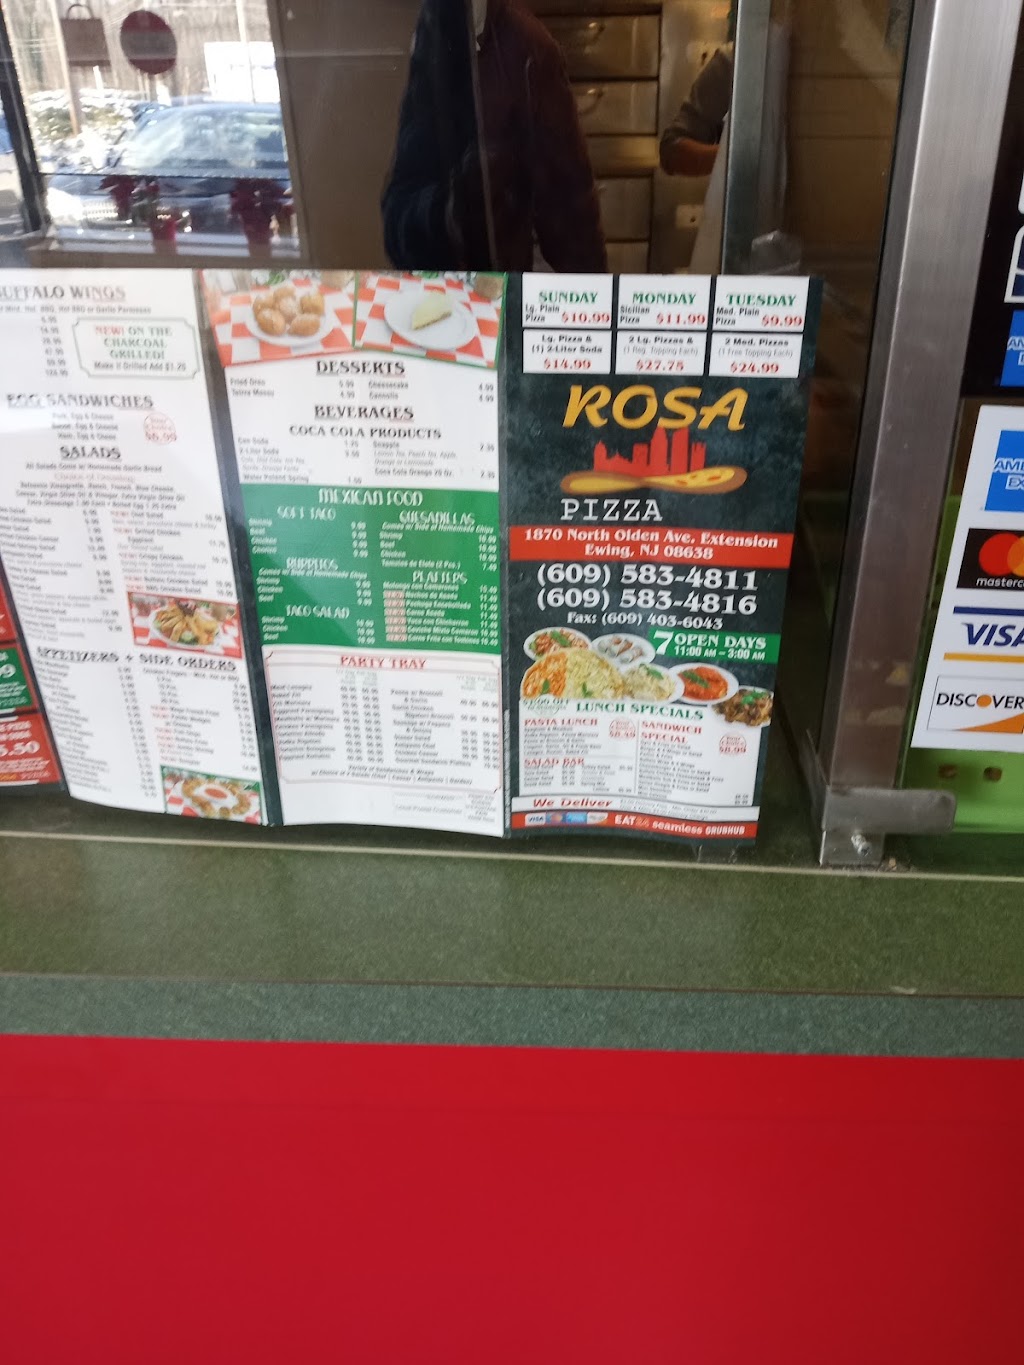 Rosa Pizza | 1870 N Olden Ave, Ewing Township, NJ 08638 | Phone: (609) 583-4811